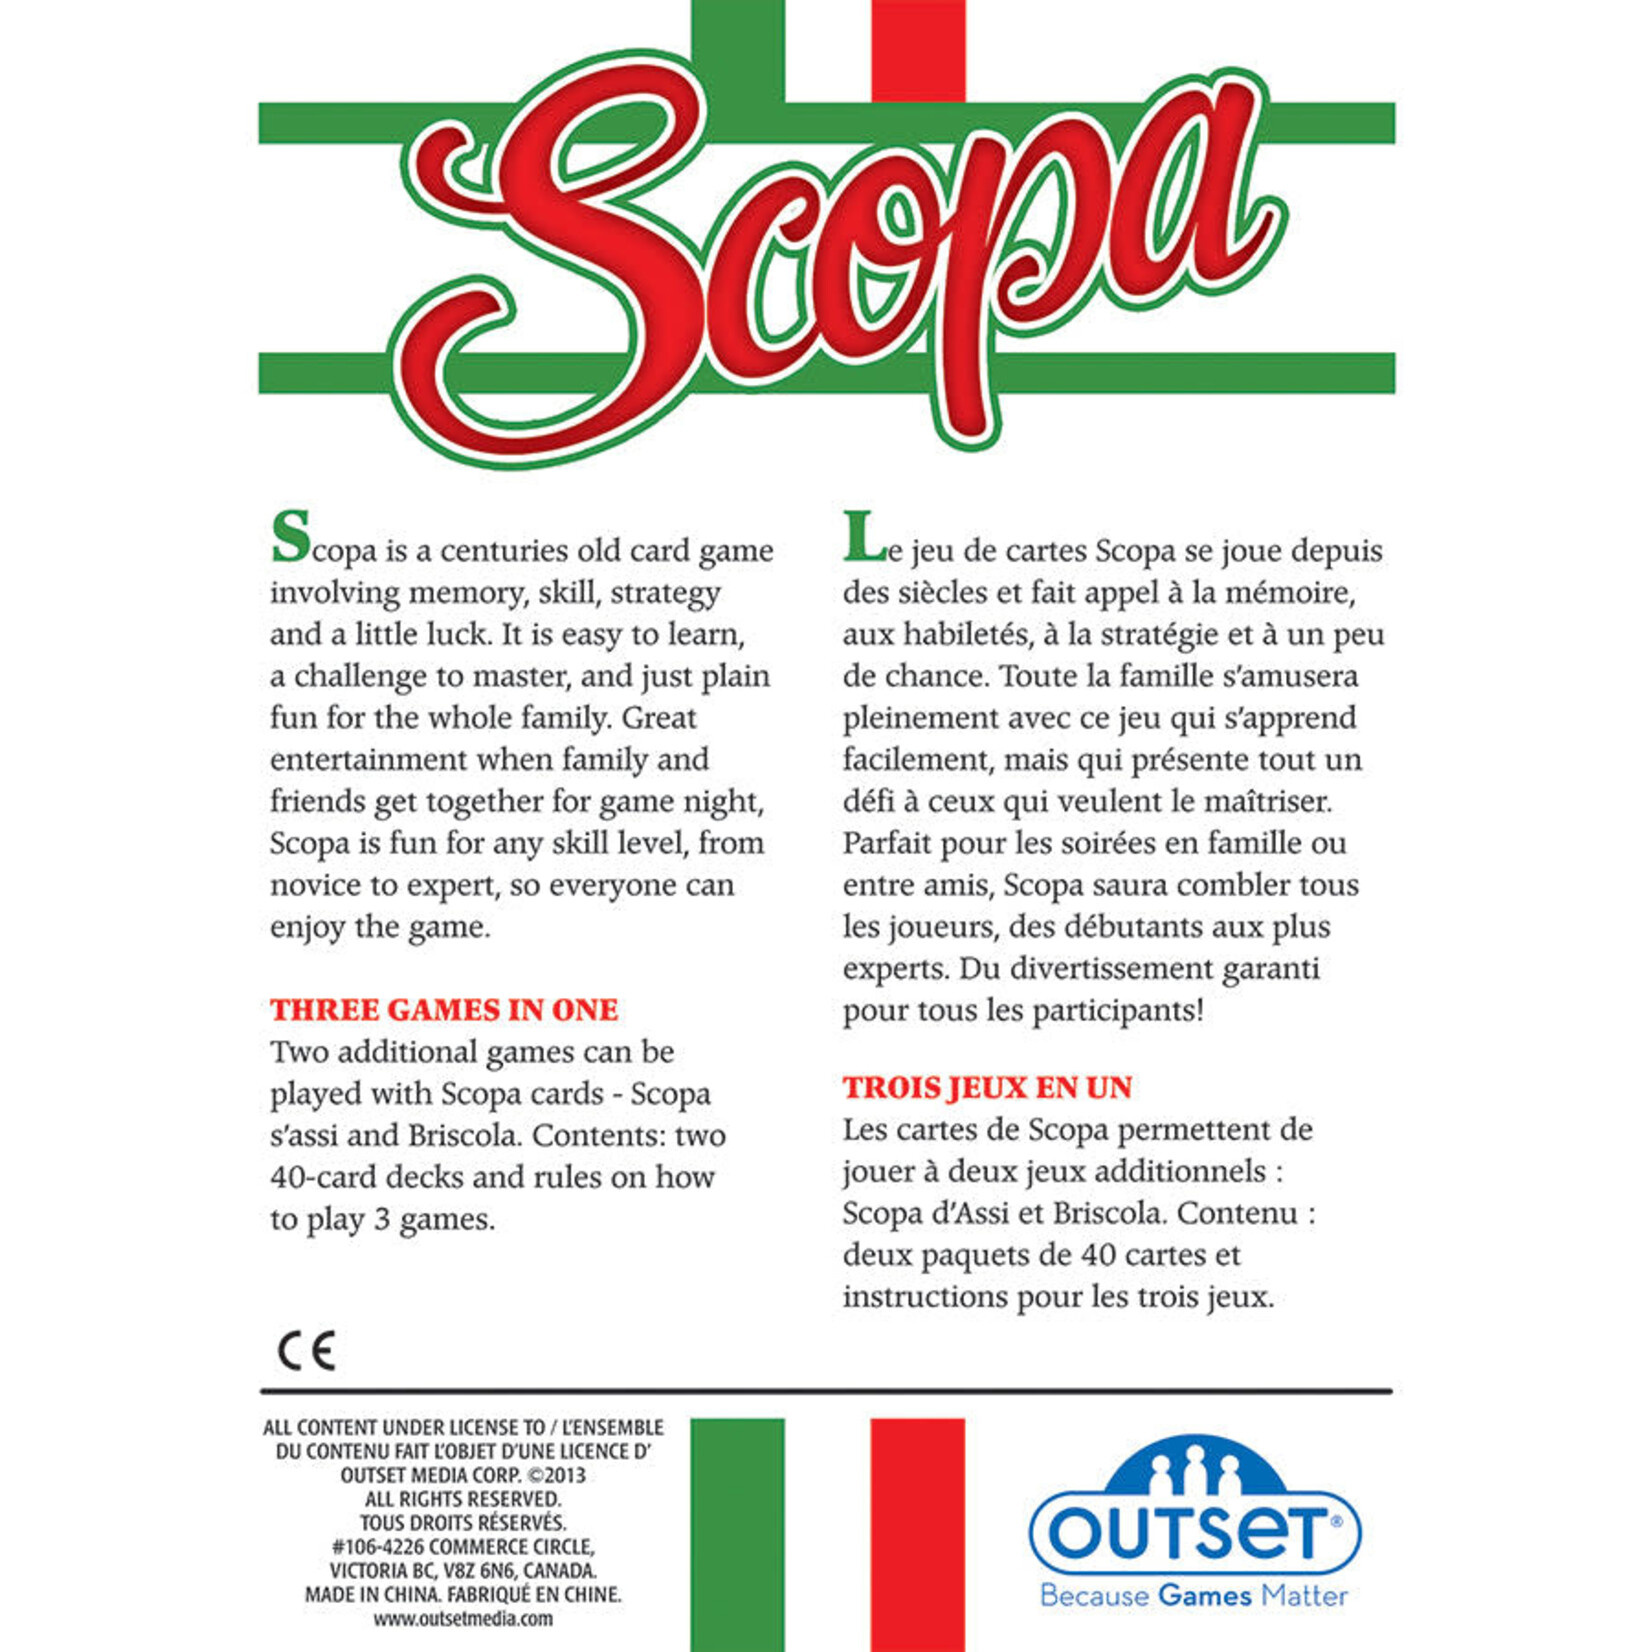 Outset Scopa: The Traditional Italian Card Game